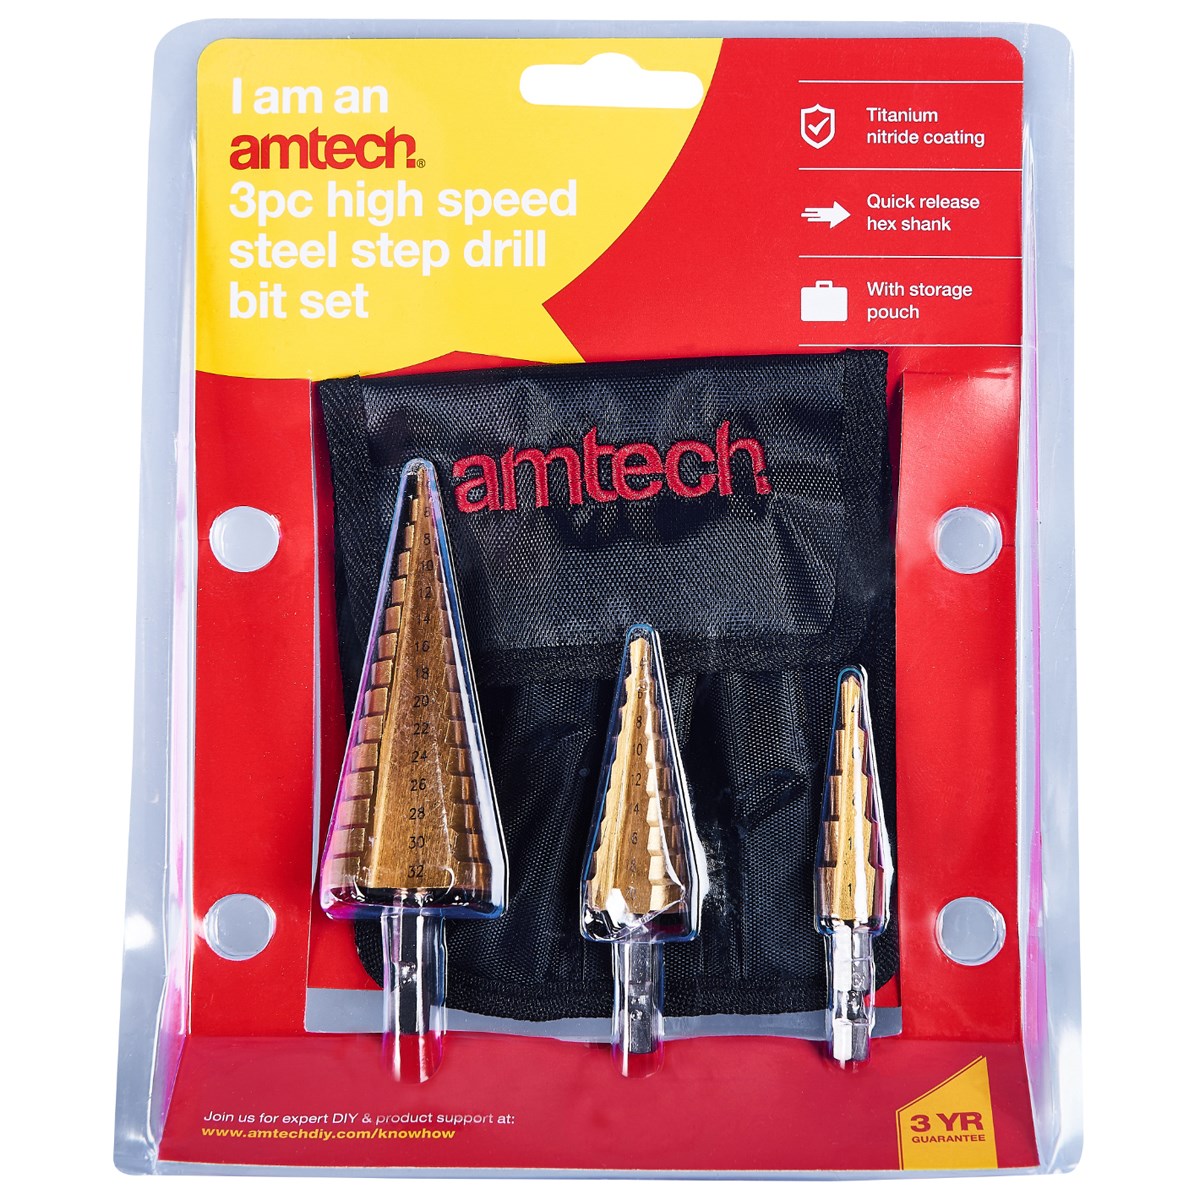 Manual Knockout Punch Kit with 3 Pc Titanium Nitride Coated High Speed Steel Step Drill Bit Set Bundle